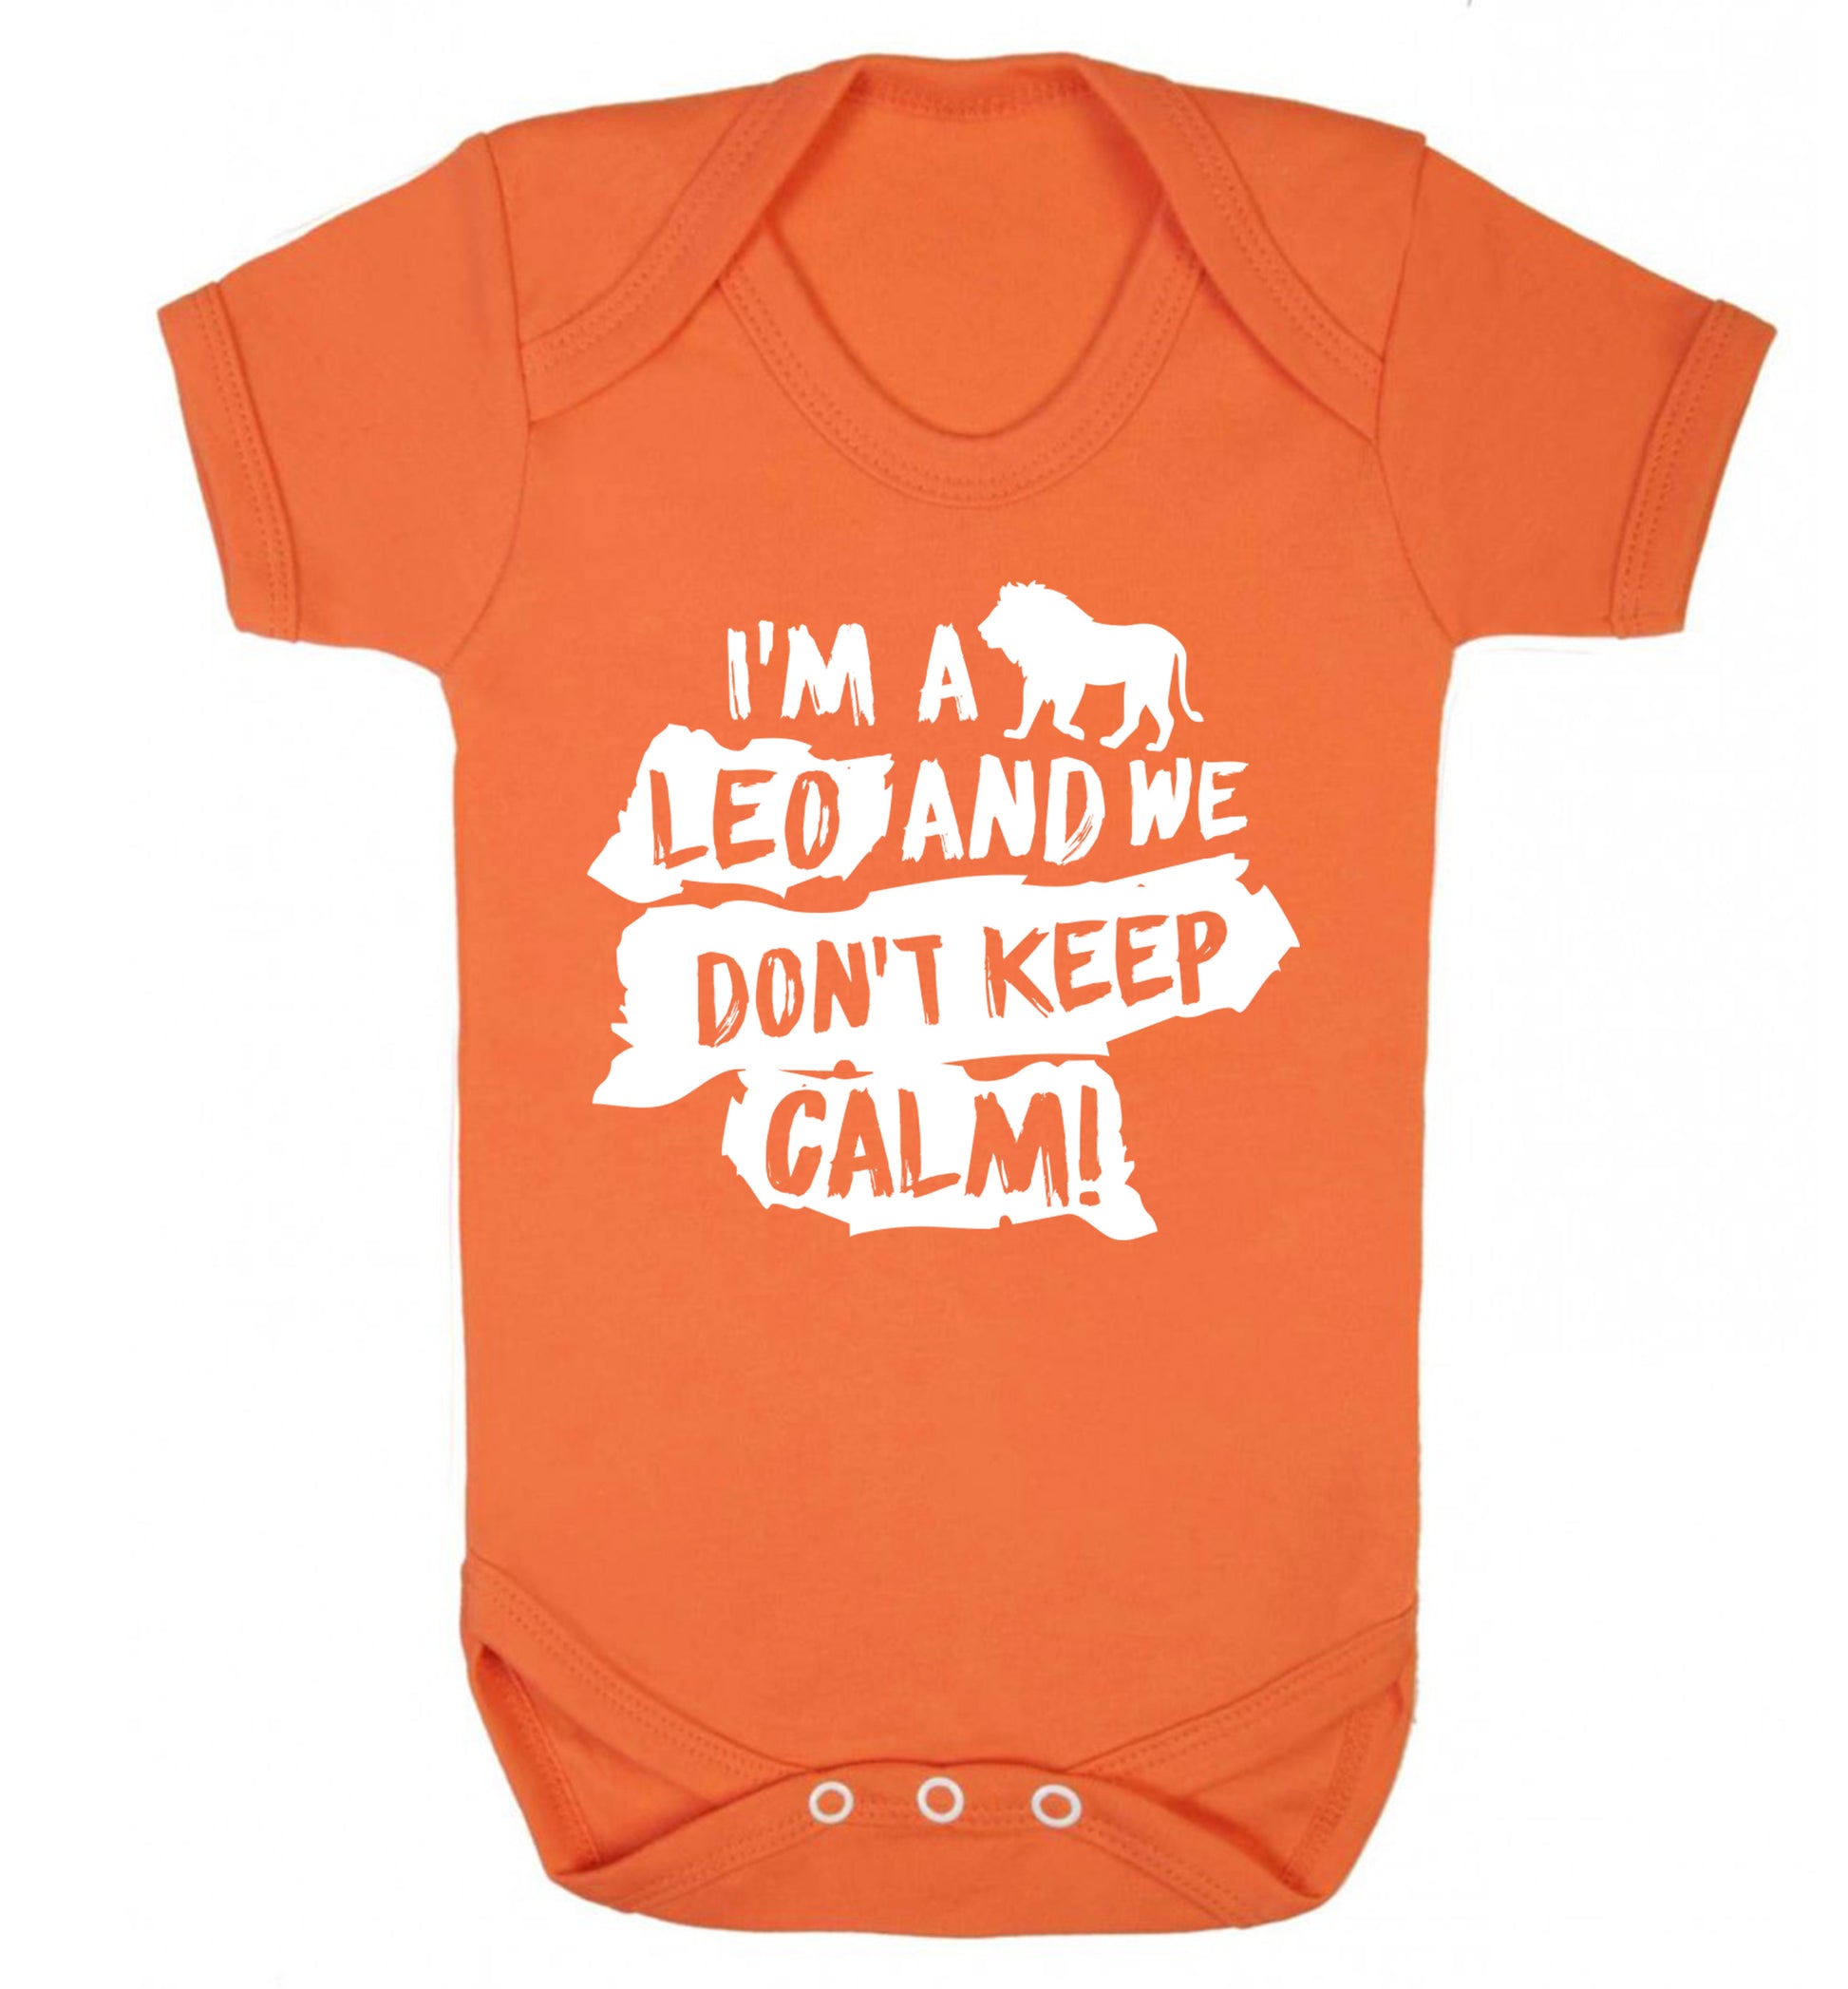 I'm a leo and we don't keep calm! Baby Vest orange 18-24 months